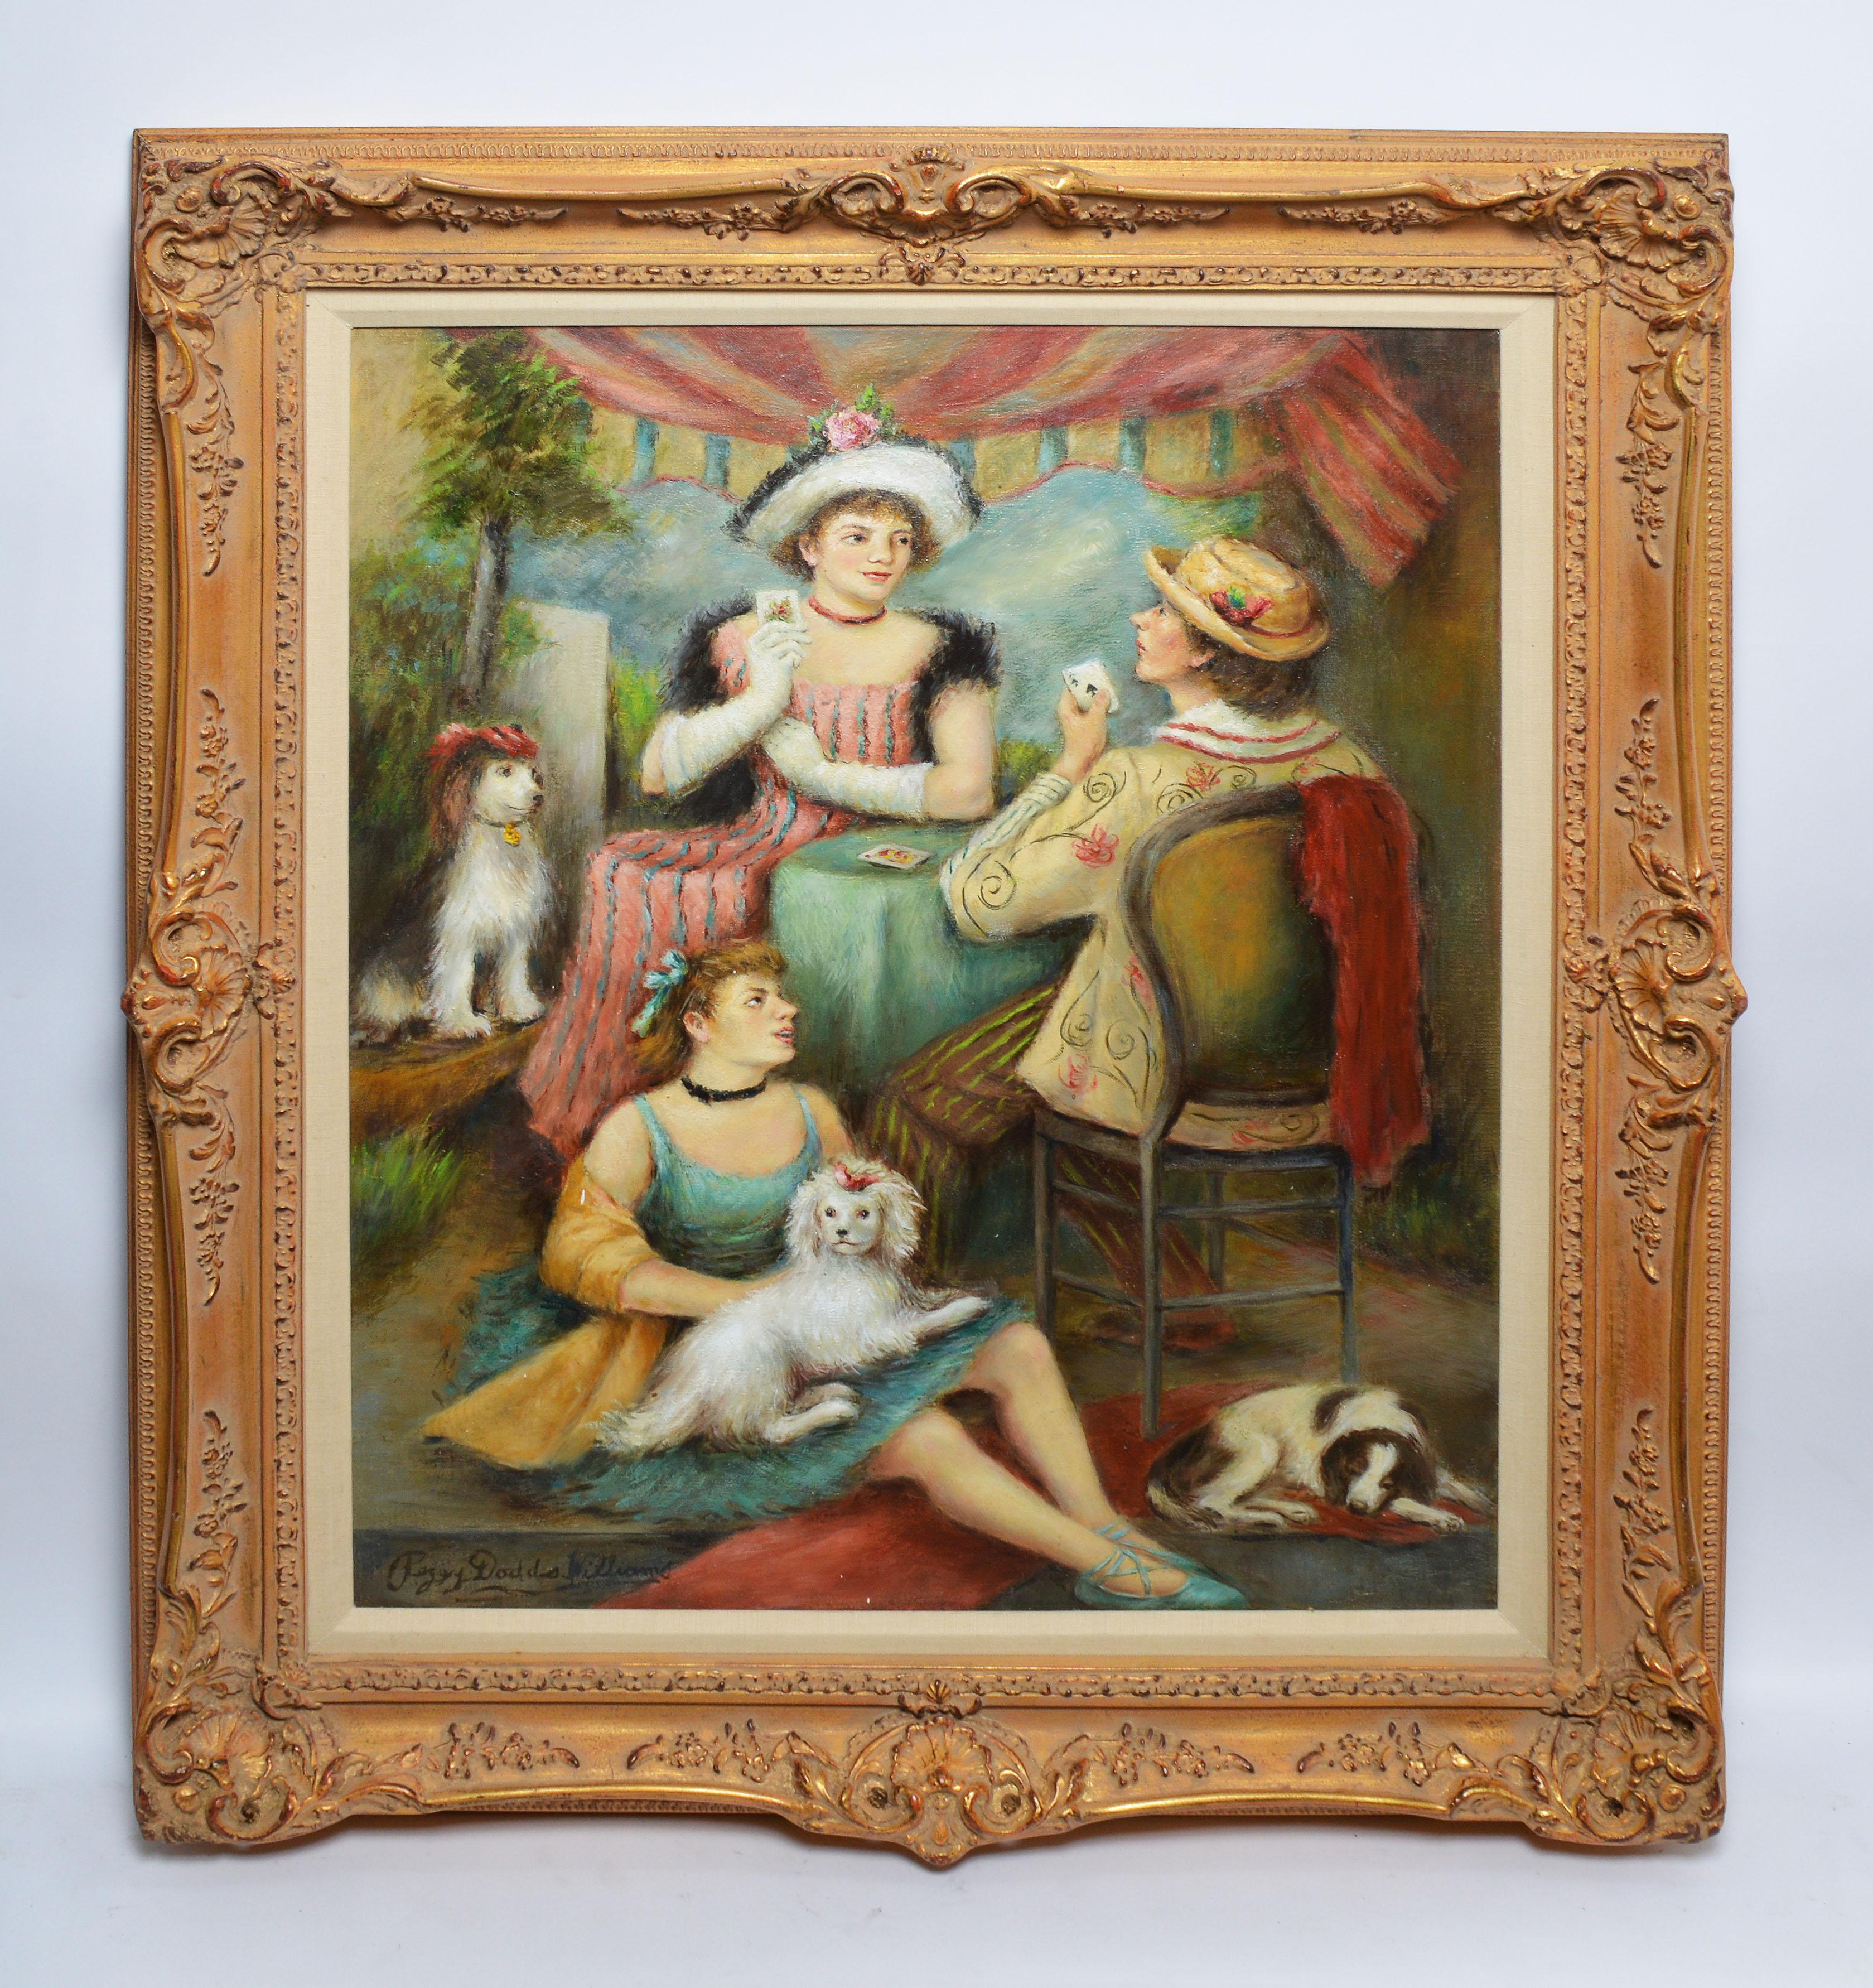 Impressionist genre view by Peggy Dodds  (1900 - 1987).  Oil on canvas, circa 1940.  Signed lower left.  Displayed in a giltwood impressionist frame.  Image size, 24